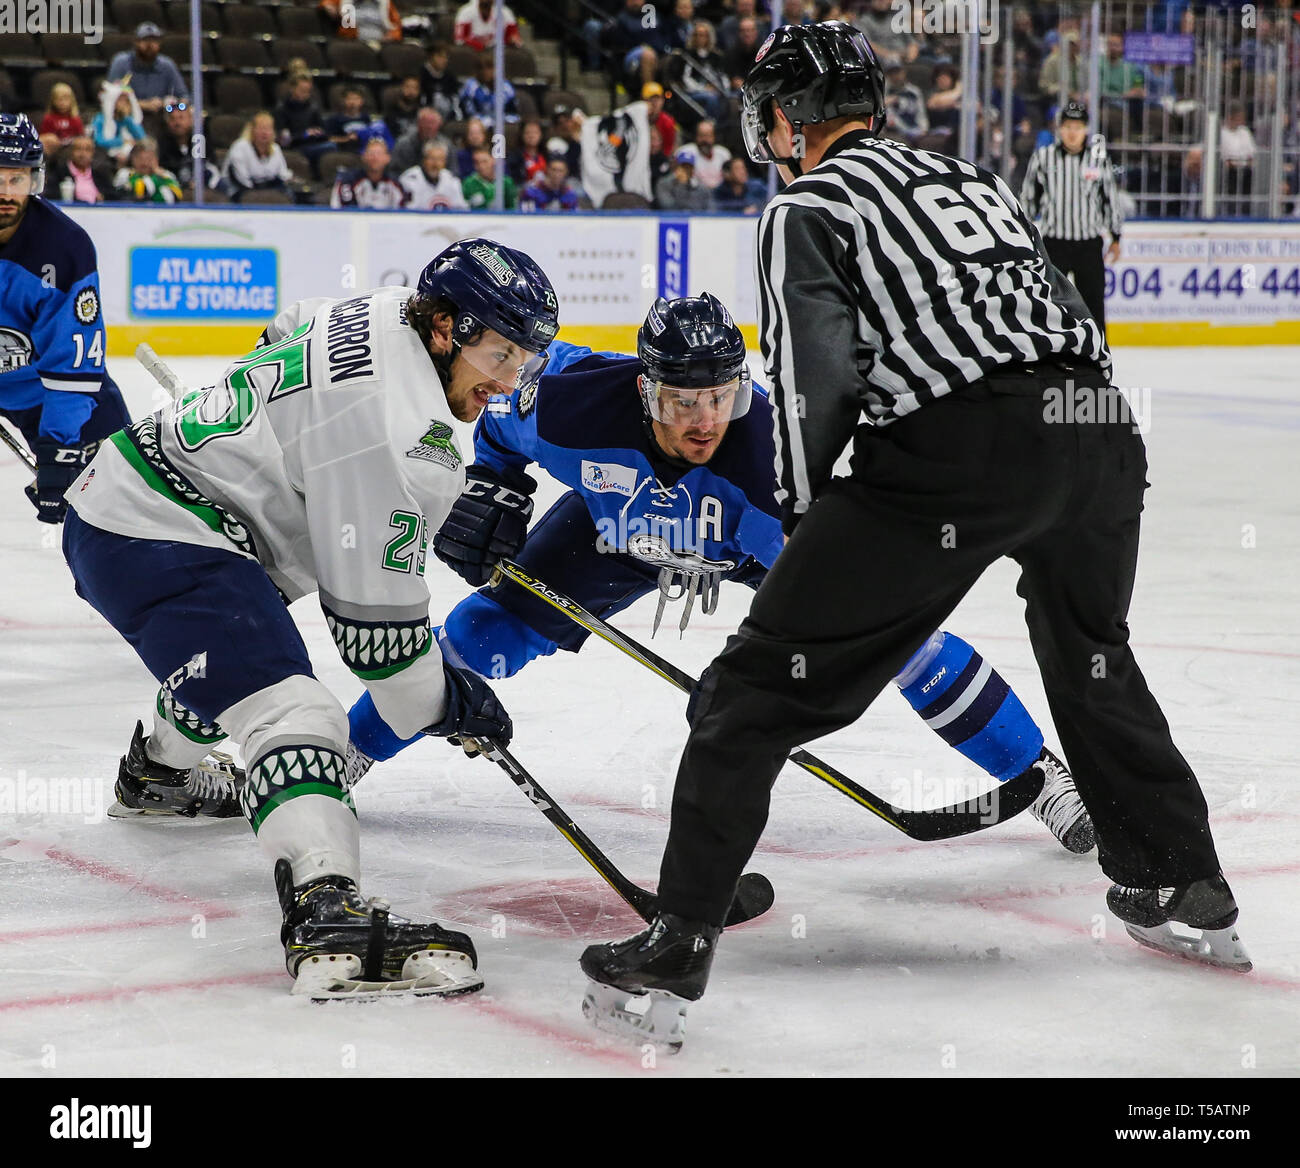 Florida Everblades forward John McCarron (25), left, and Jacksonville Icemen forward Kris Newbury (11) faceoff during the first period of an ECHL professional hockey playoff game at Veterans Memorial Arena in Jacksonville, Fla., Saturday, April 20, 2019. (Gary Lloyd McCullough/Cal Sport Media) Stock Photo